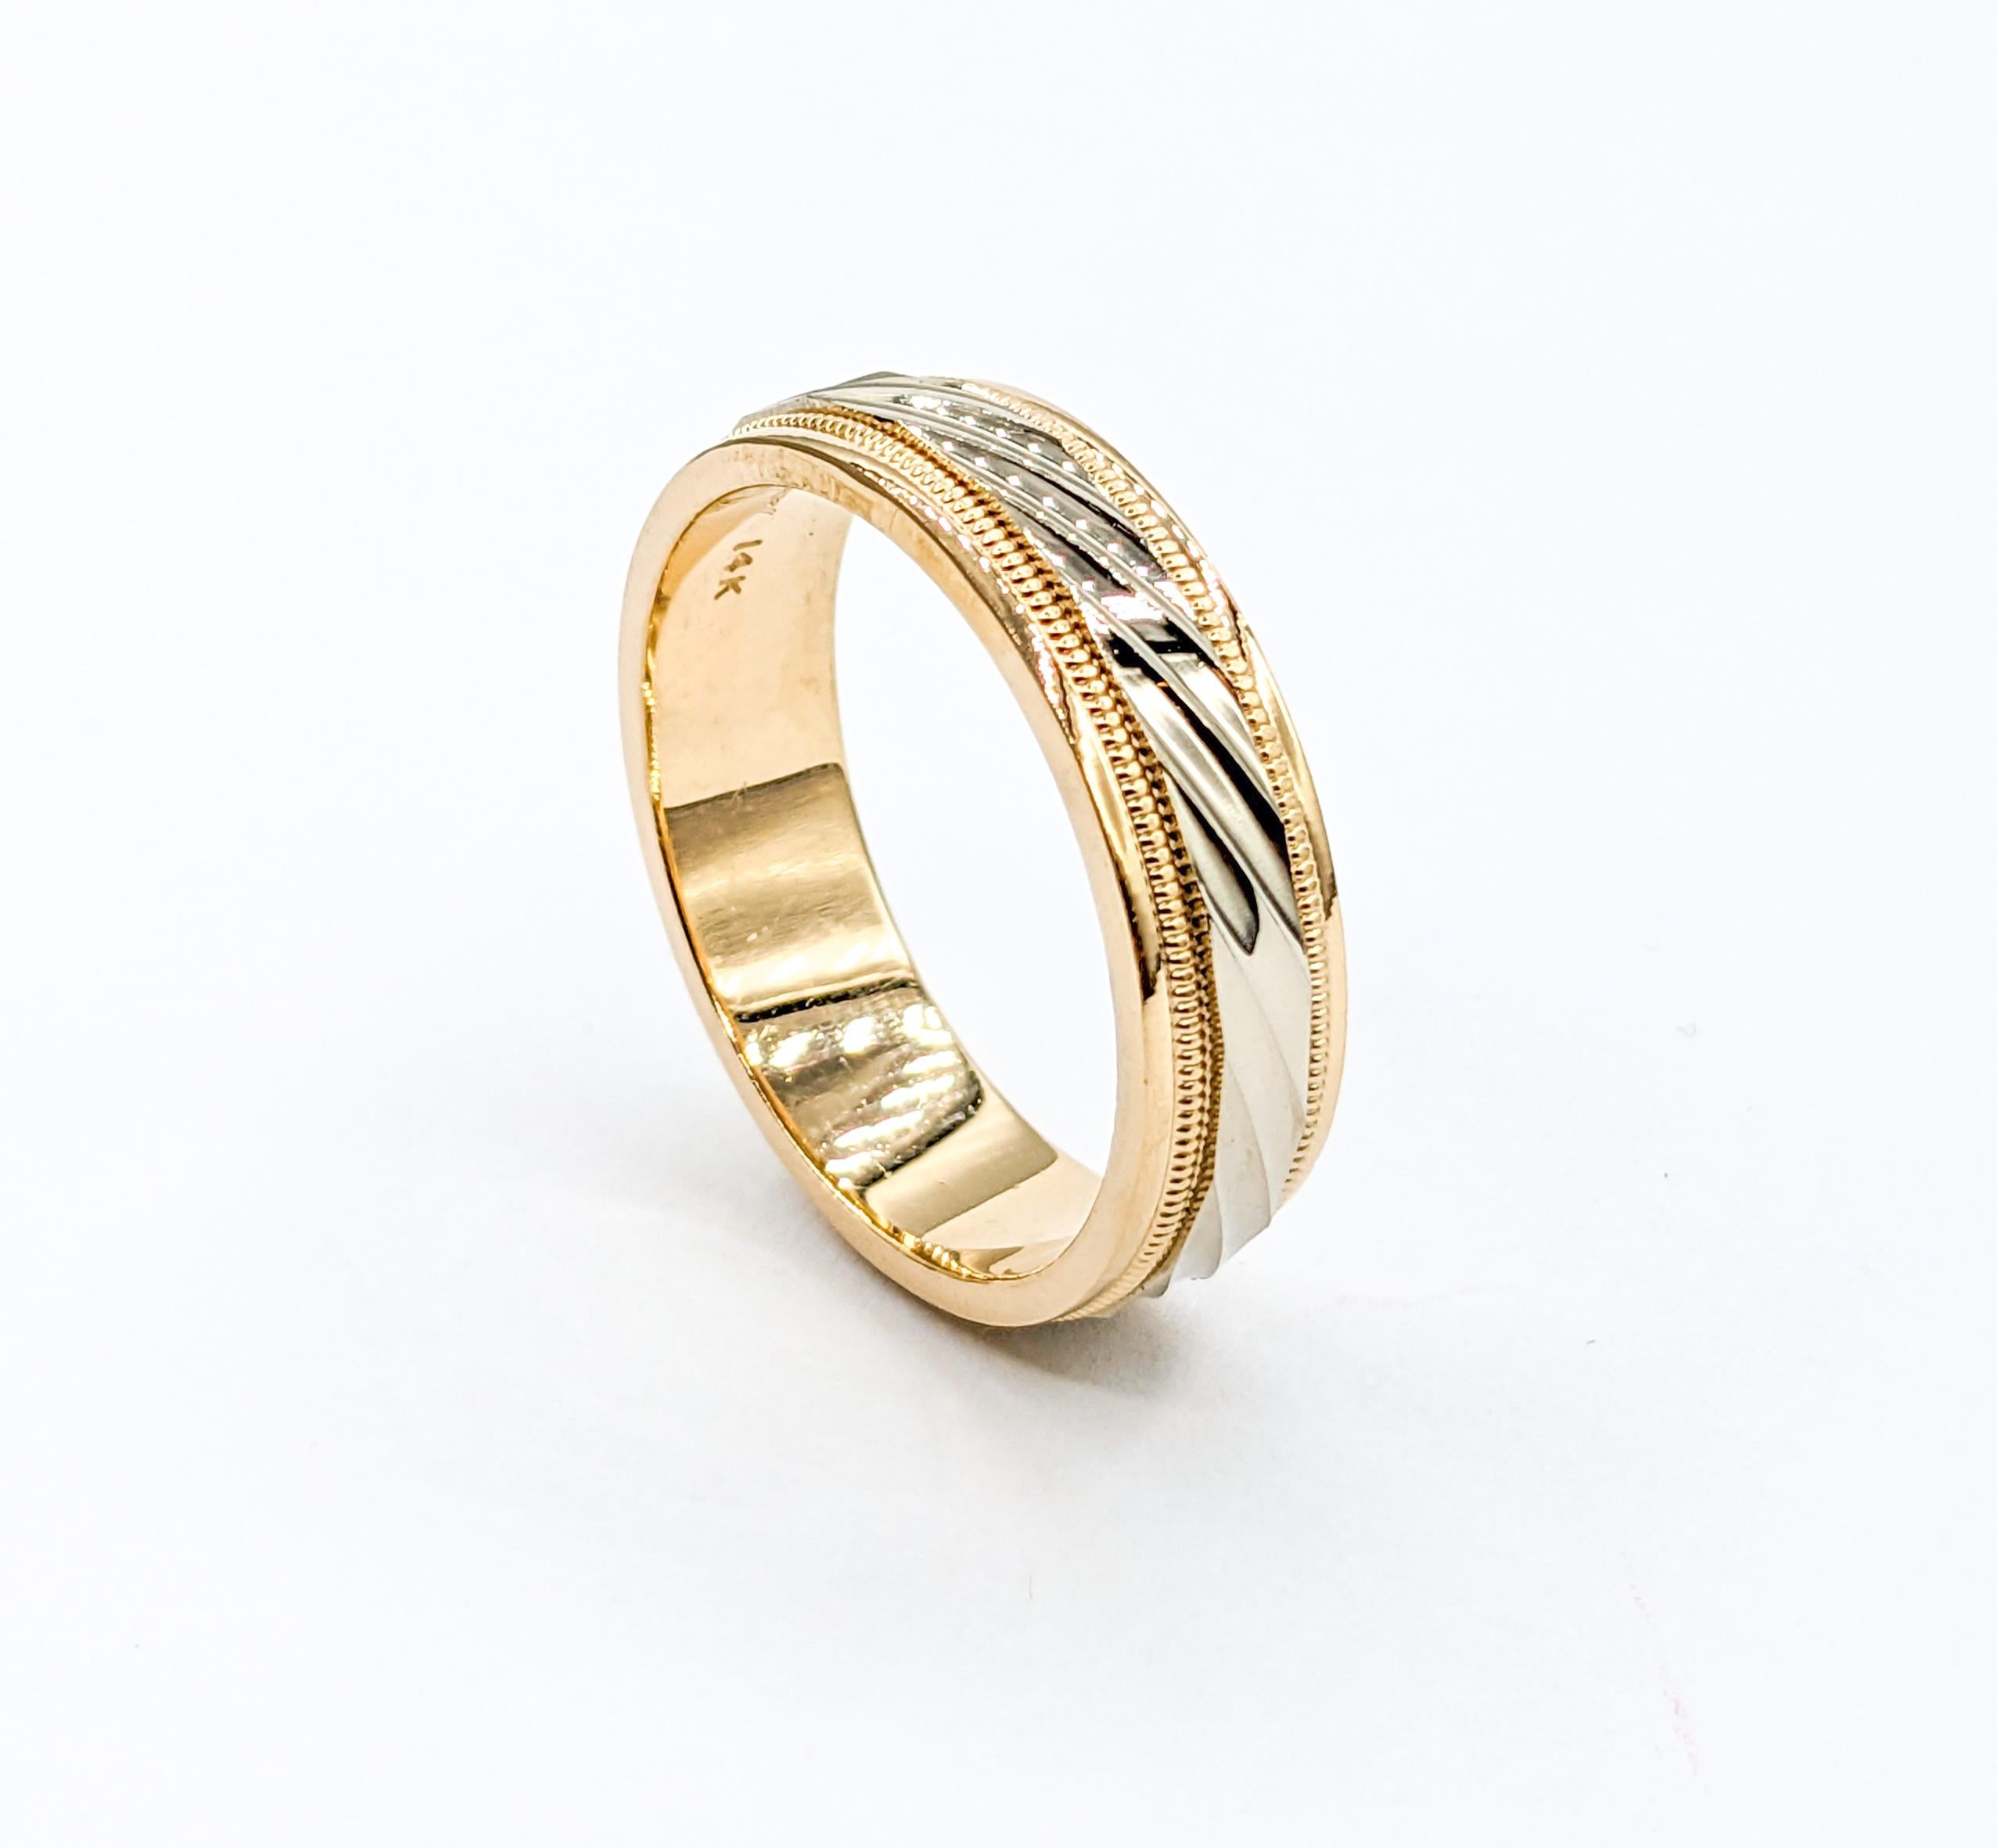 Milgrain Stripped Men's Ring Yellow Gold

Discover the allure of this exquisite ring, meticulously crafted in 14 karat two tone (White and yellow gold). It features a stunning Milgrain Stripe design, measuring 6.9 mm wide, that radiates timeless